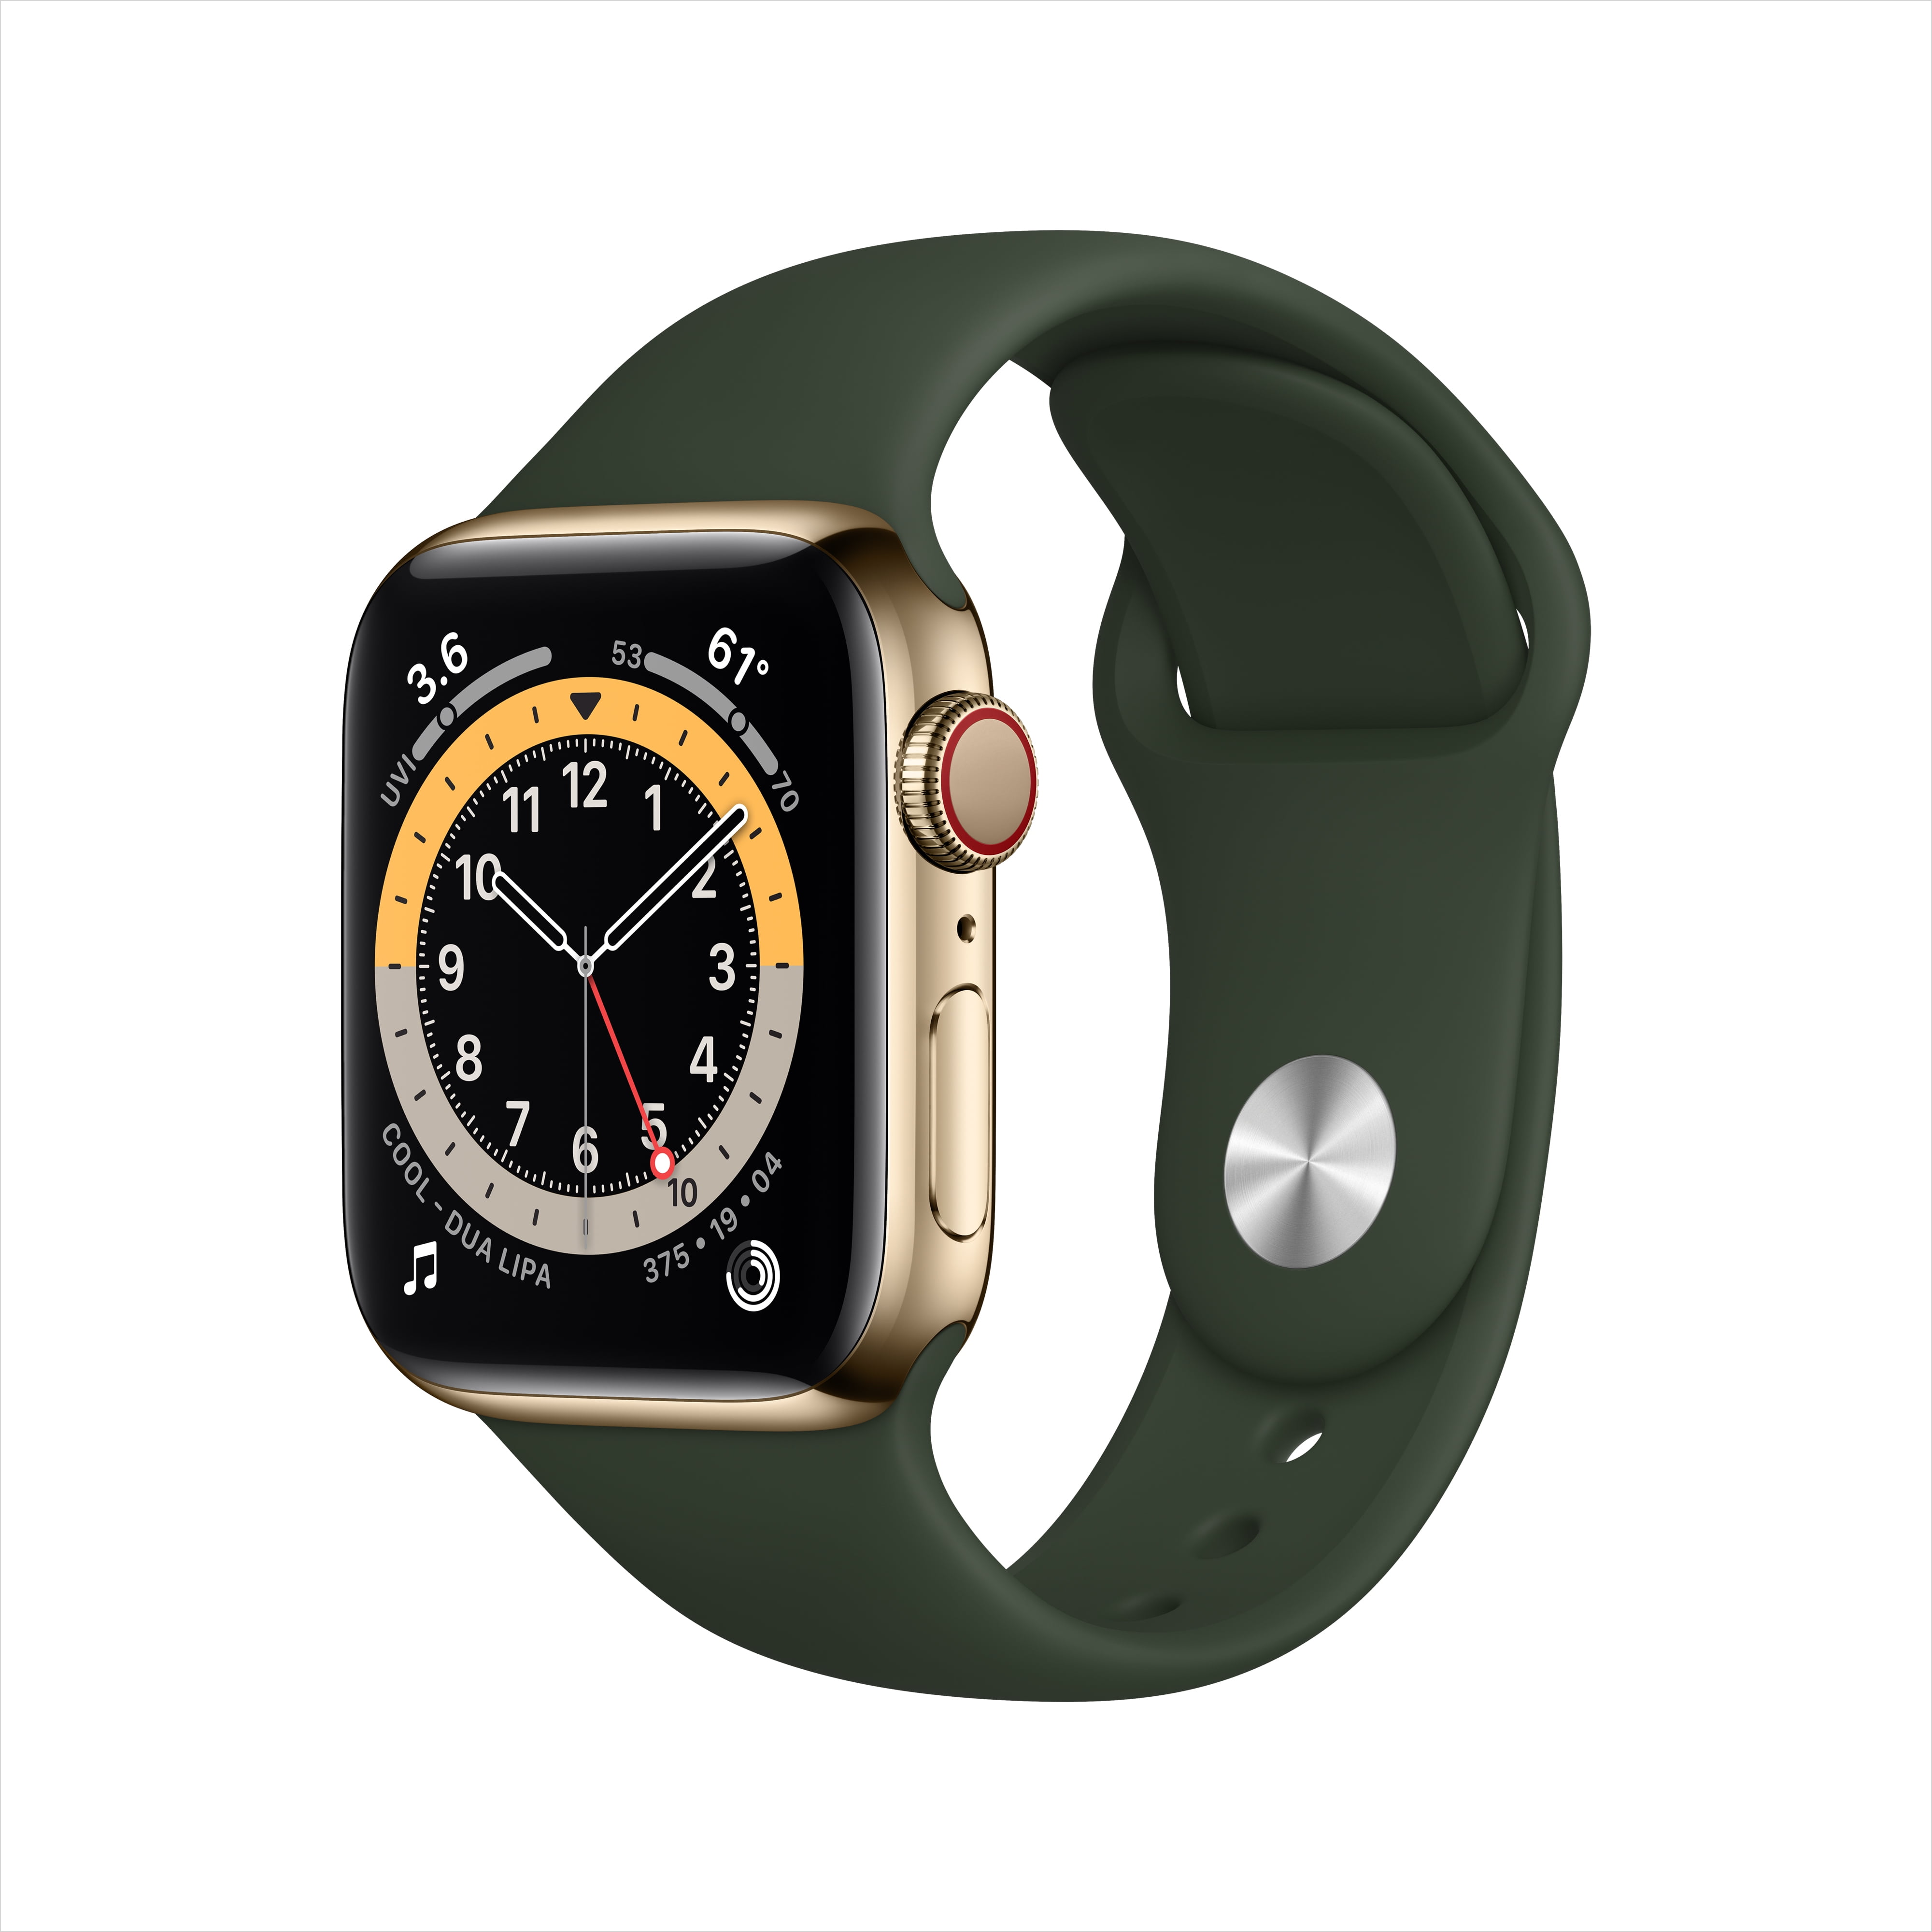 Apple Watch Series 5 GPS + Cellular, 44mm Space Gray Aluminum Case with  Black Sport Band - Walmart.com